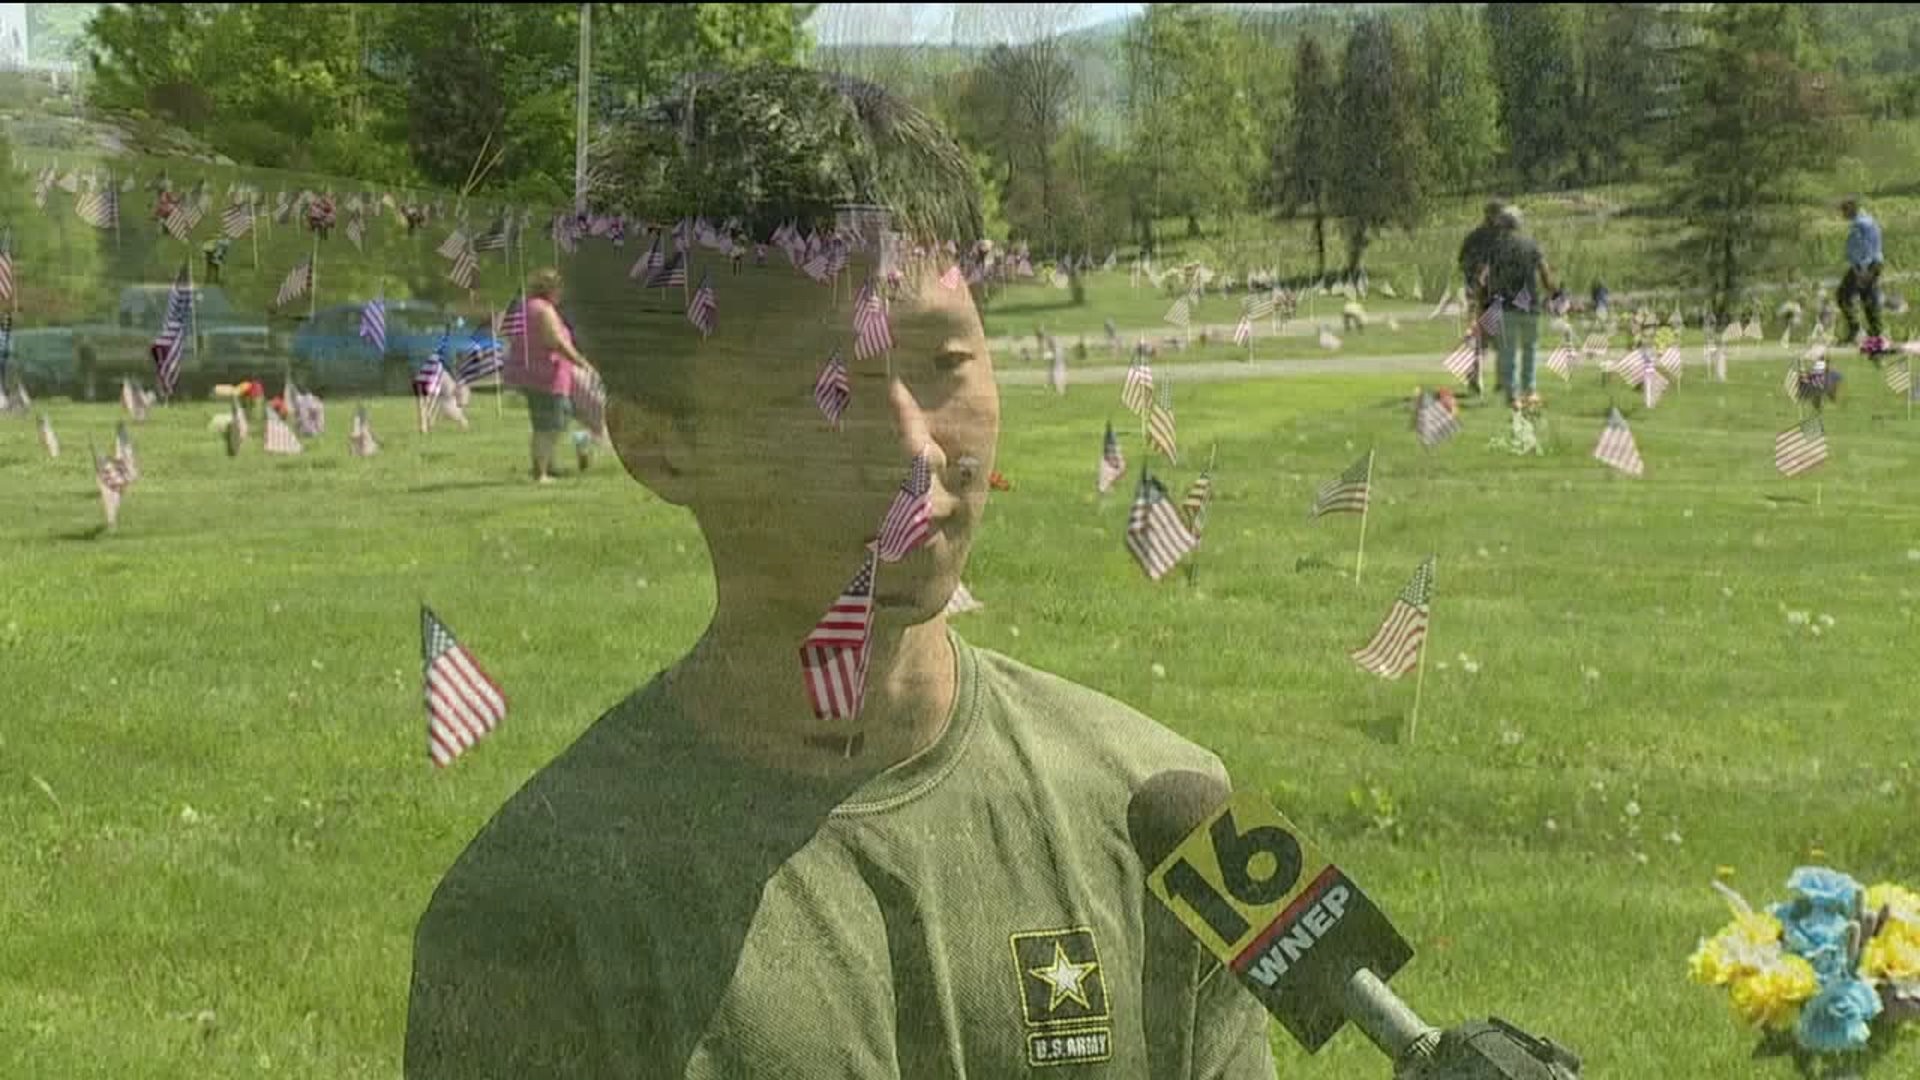 Memorial Day Tradition Continuing Thanks to Help of Next Generation